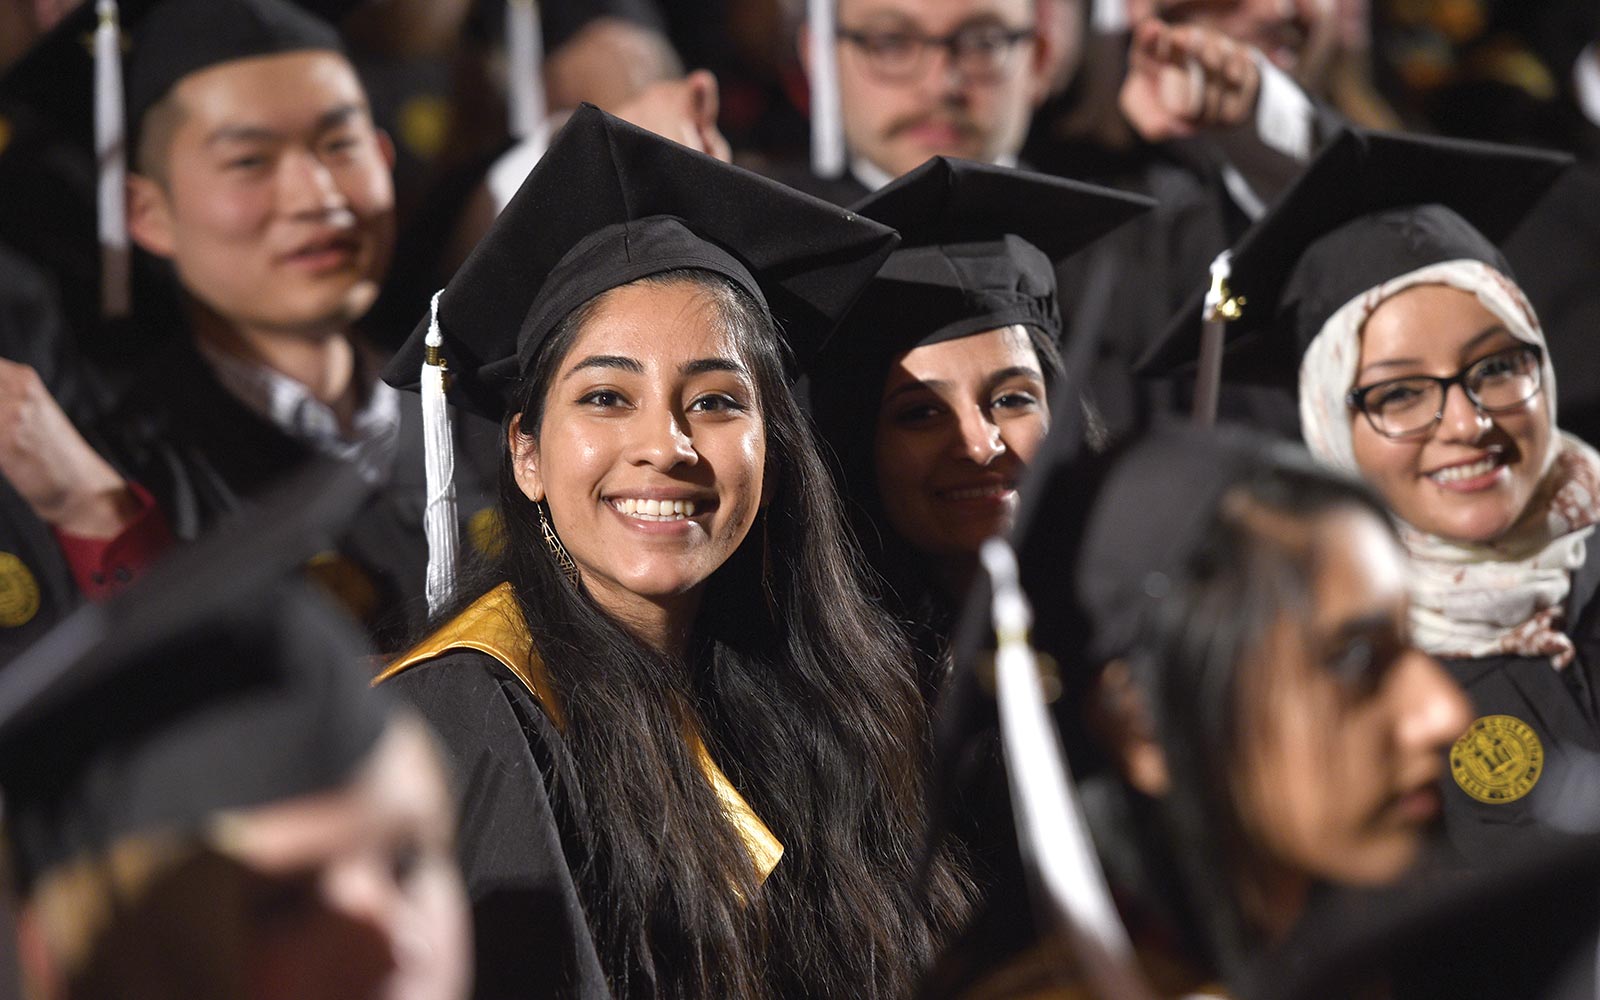 Wayne State’s 150th academic year culminates with commencement ceremonies